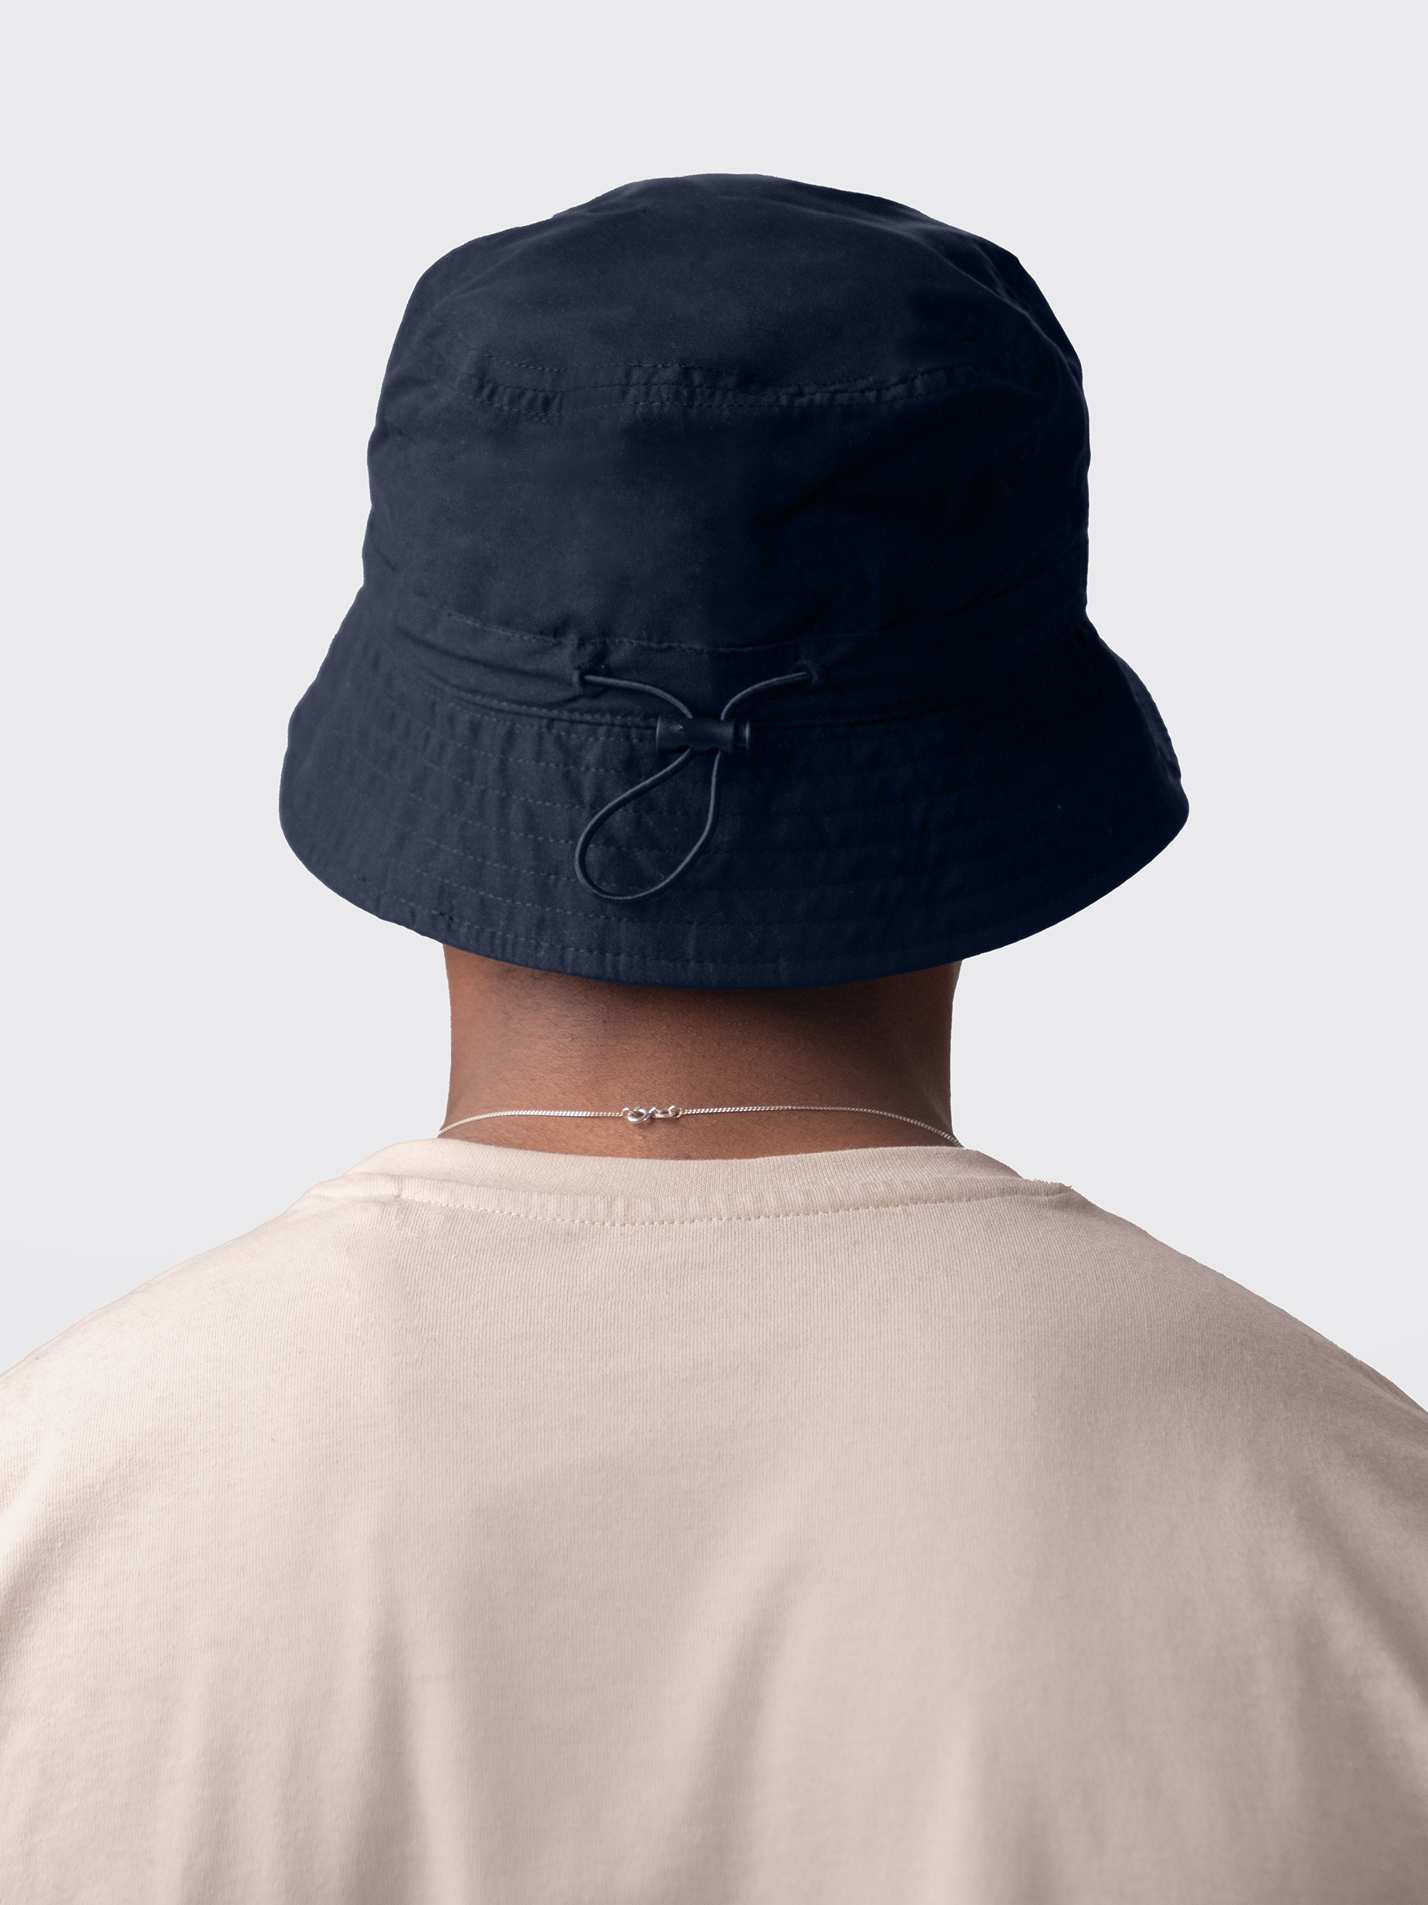 Lady Margaret Hall Oxford Sustainable Bucket Hat